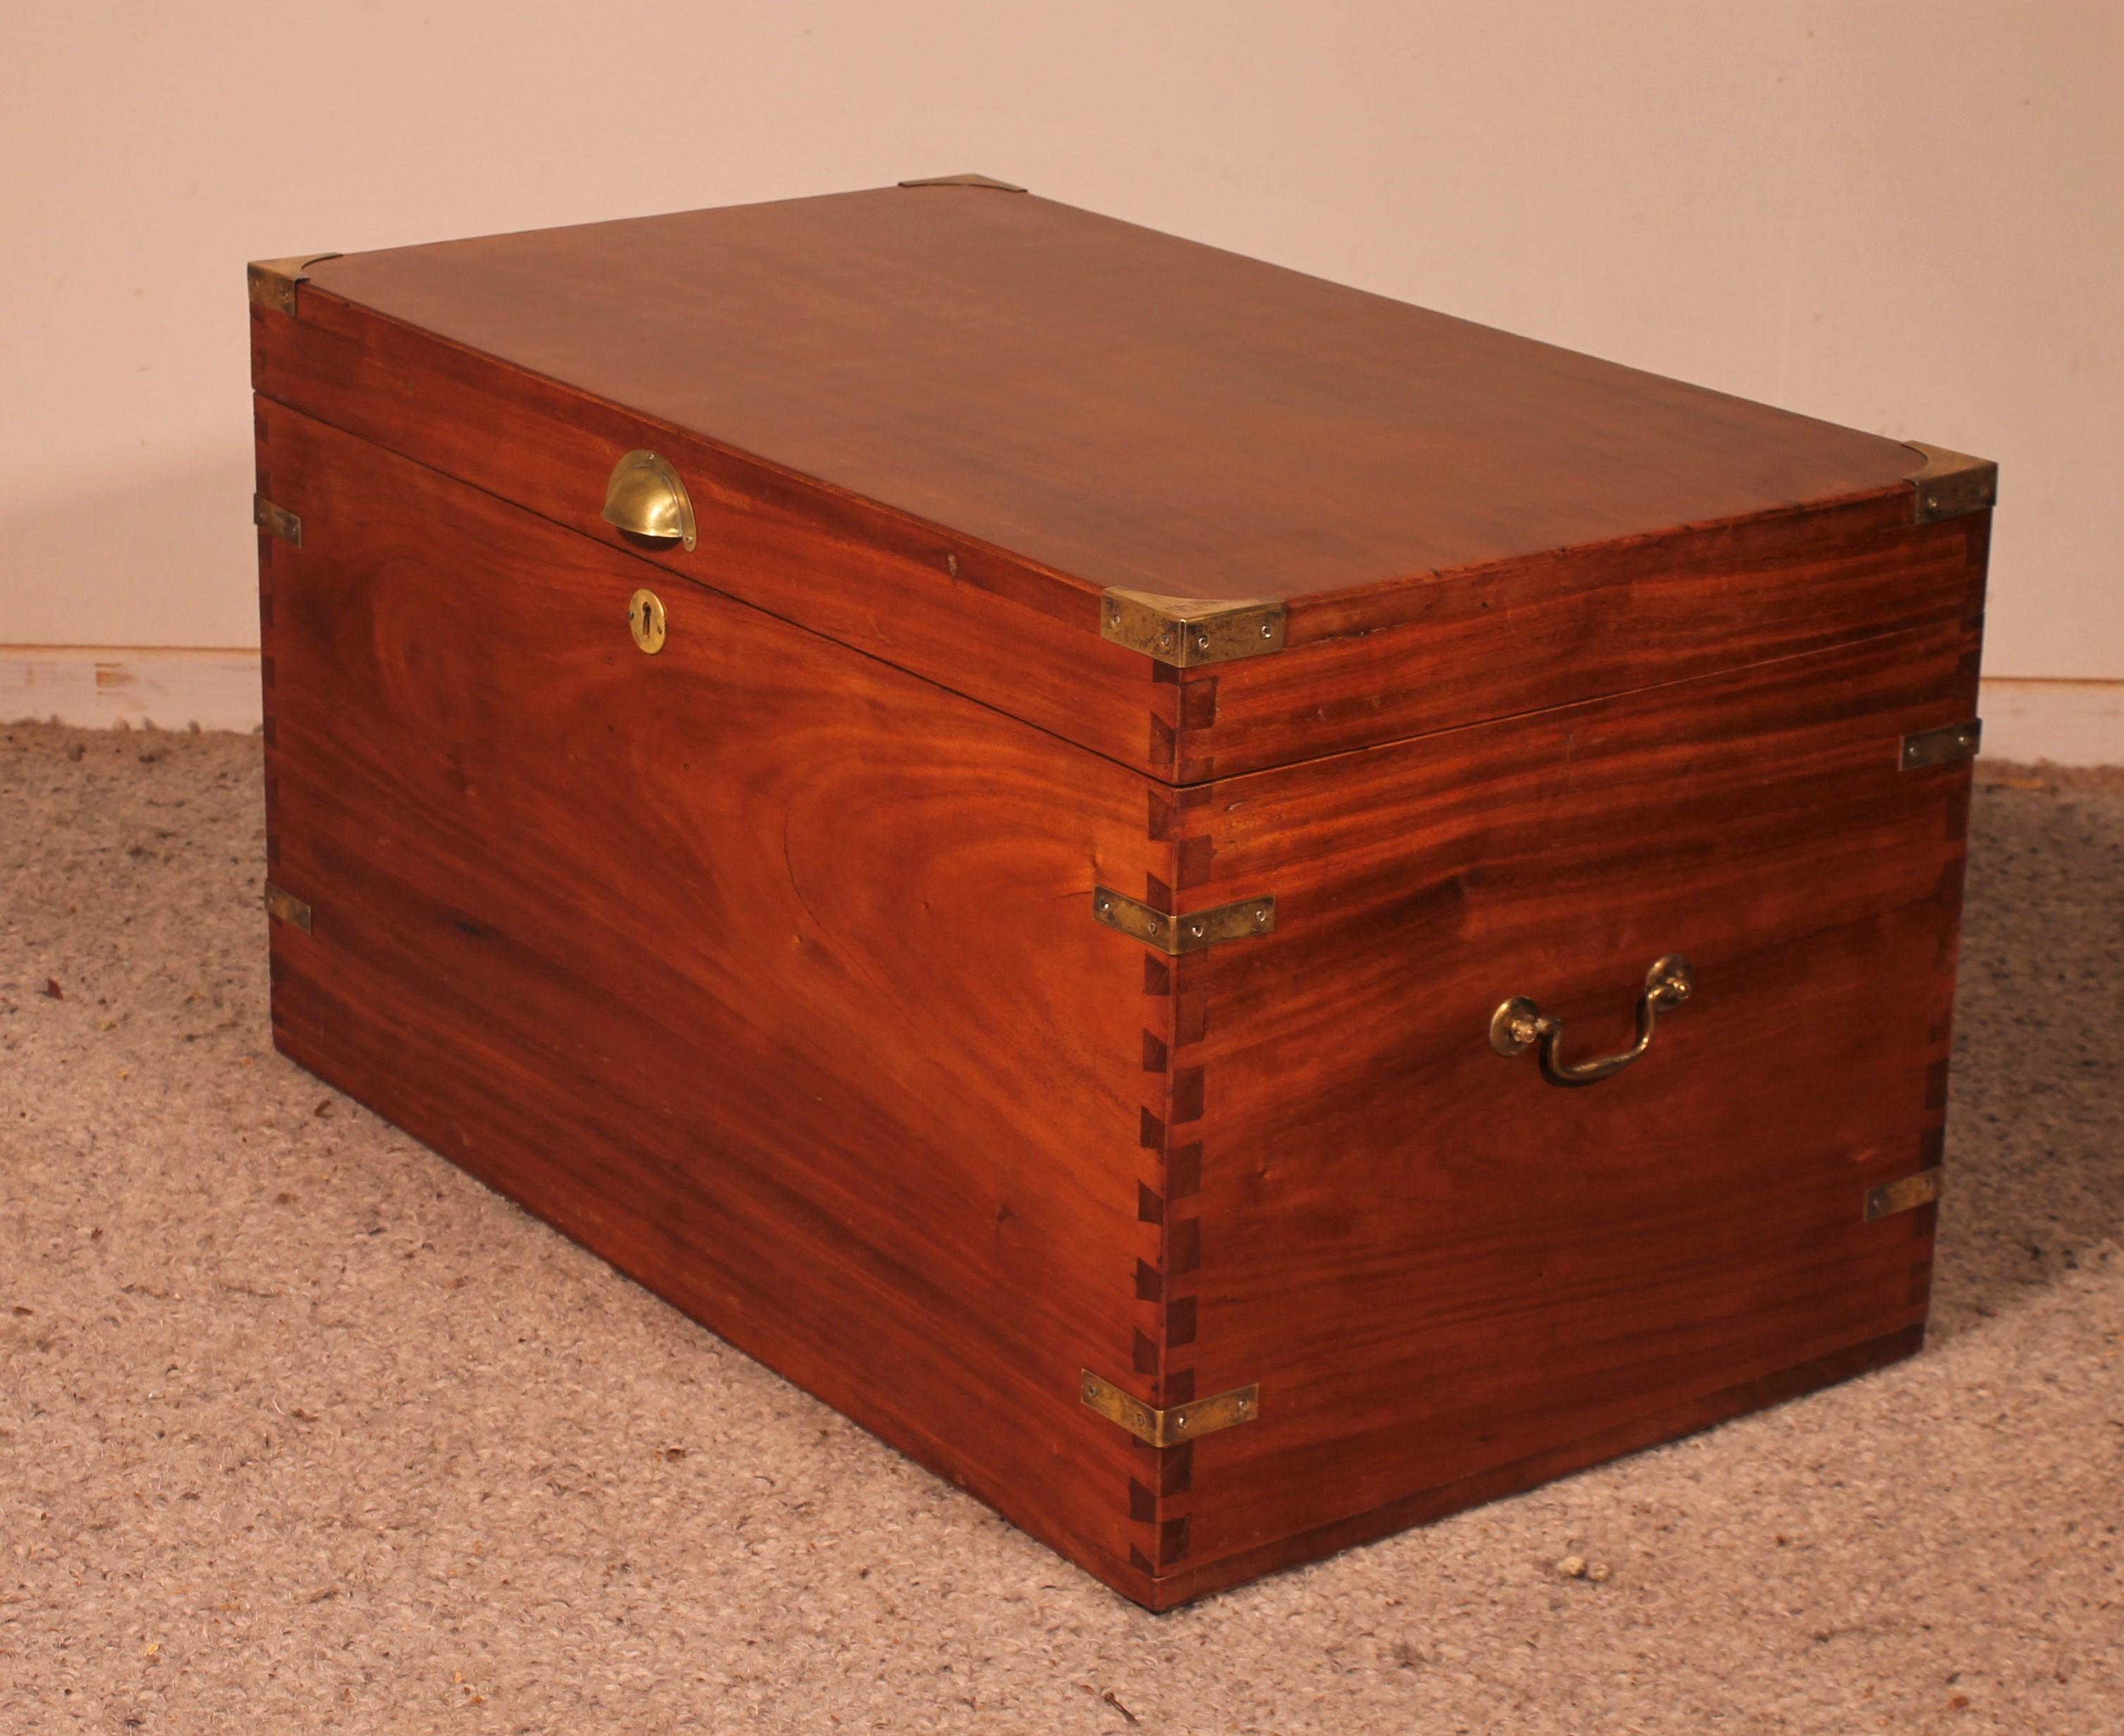 Superb Campaign chest in camphor wood from circa 1900 from England. Indeed these pieces of furniture called 